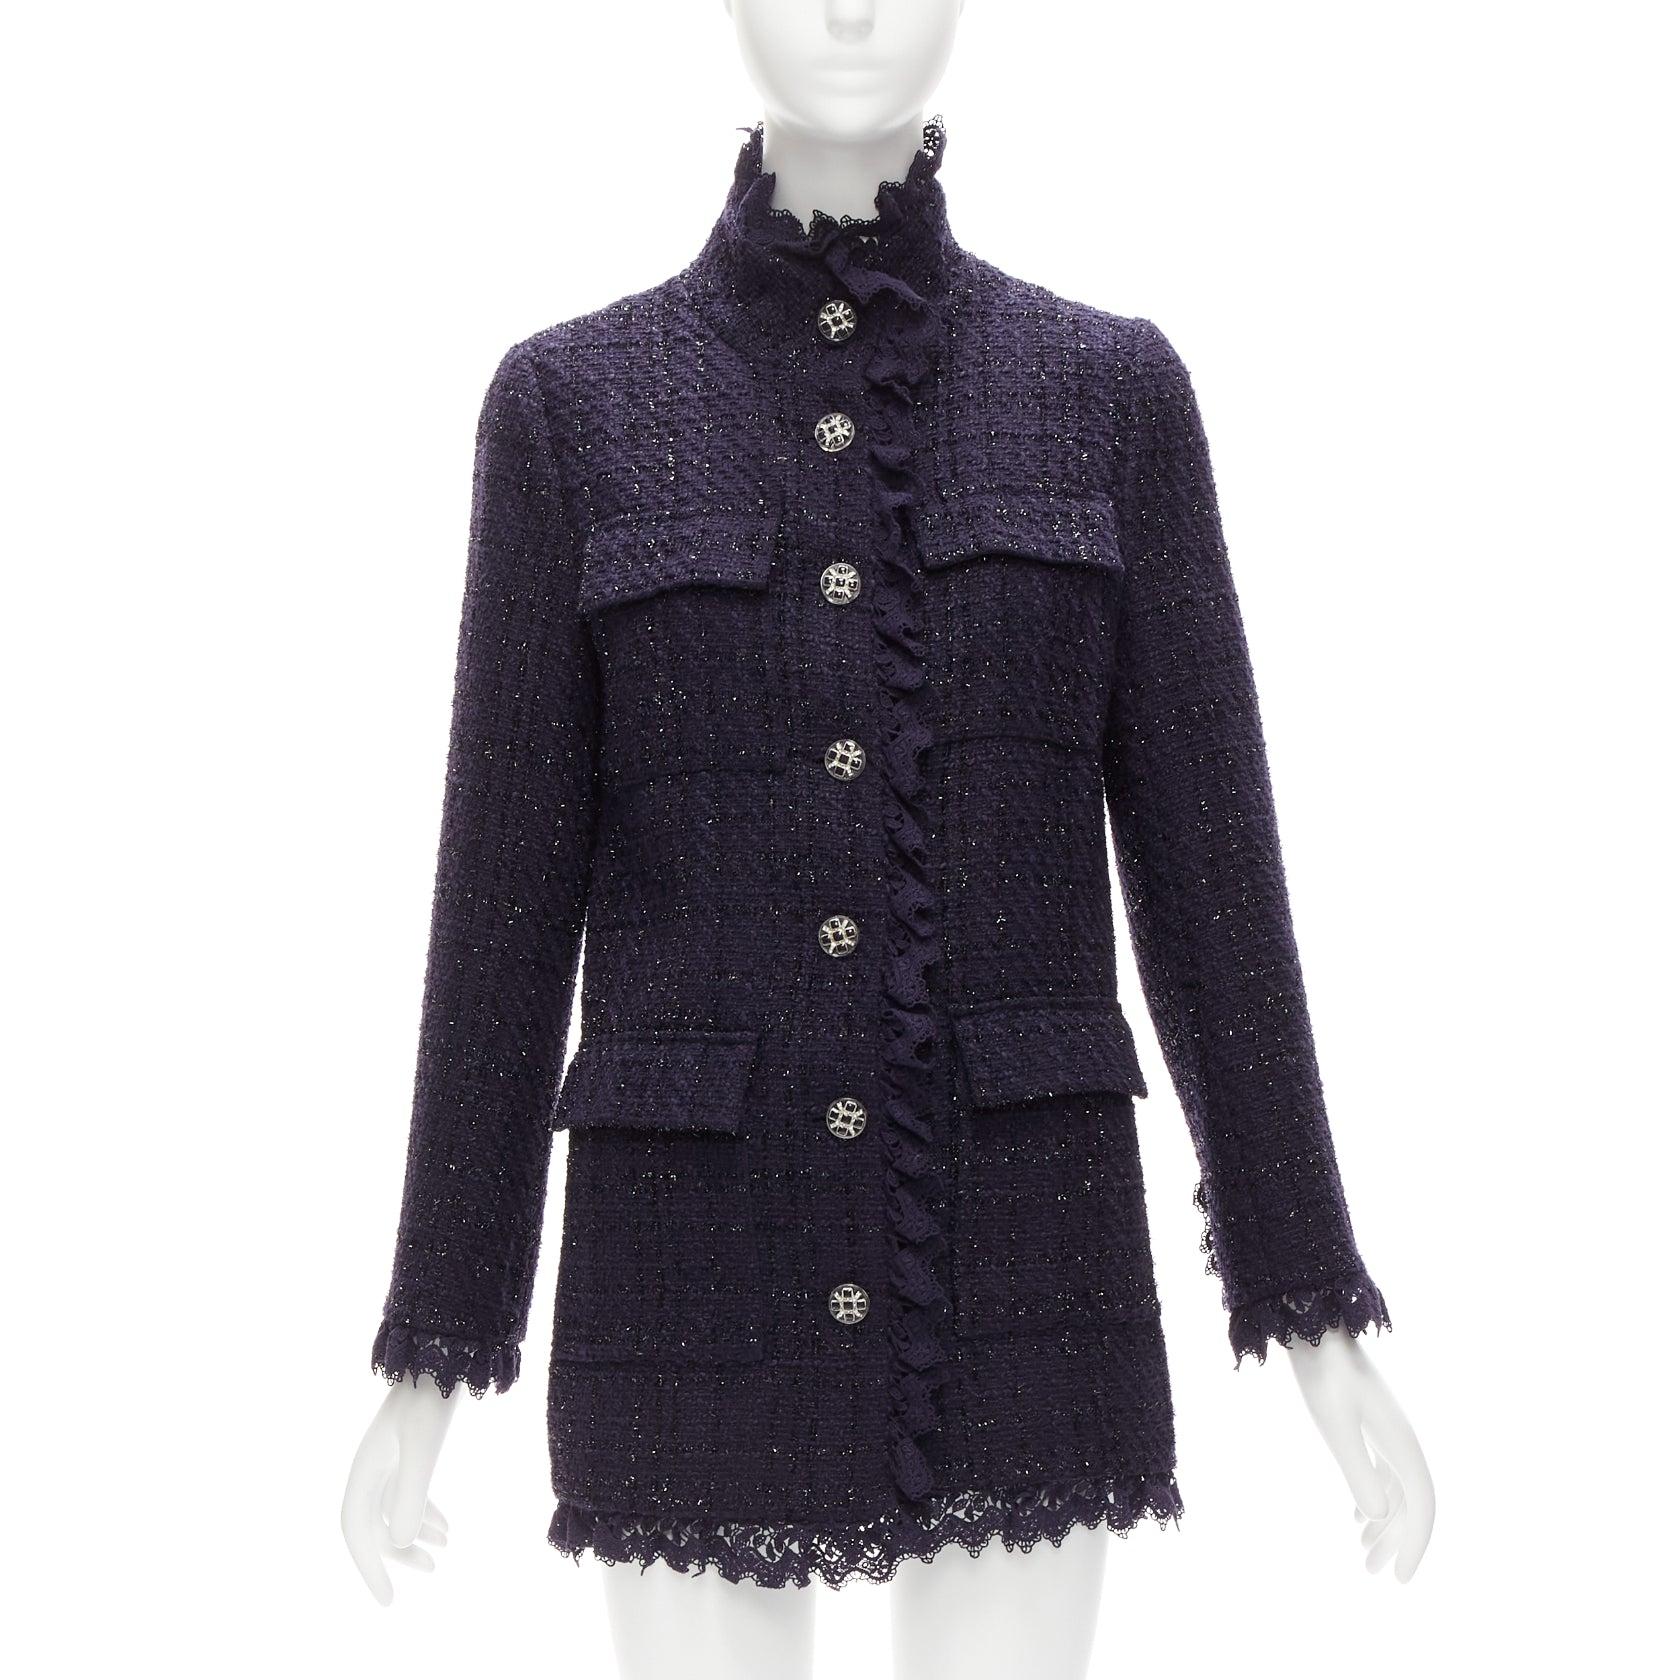 new MOISELLE navy blue metallic tweed ruffle trim 4 pocket long jacket coat FR38 M
Reference: NKLL/A00064
Brand: Moiselle
Material: Polyester
Color: Navy
Pattern: Tweed
Closure: Button
Lining: Navy Fabric
Extra Details: Black resin buttons on